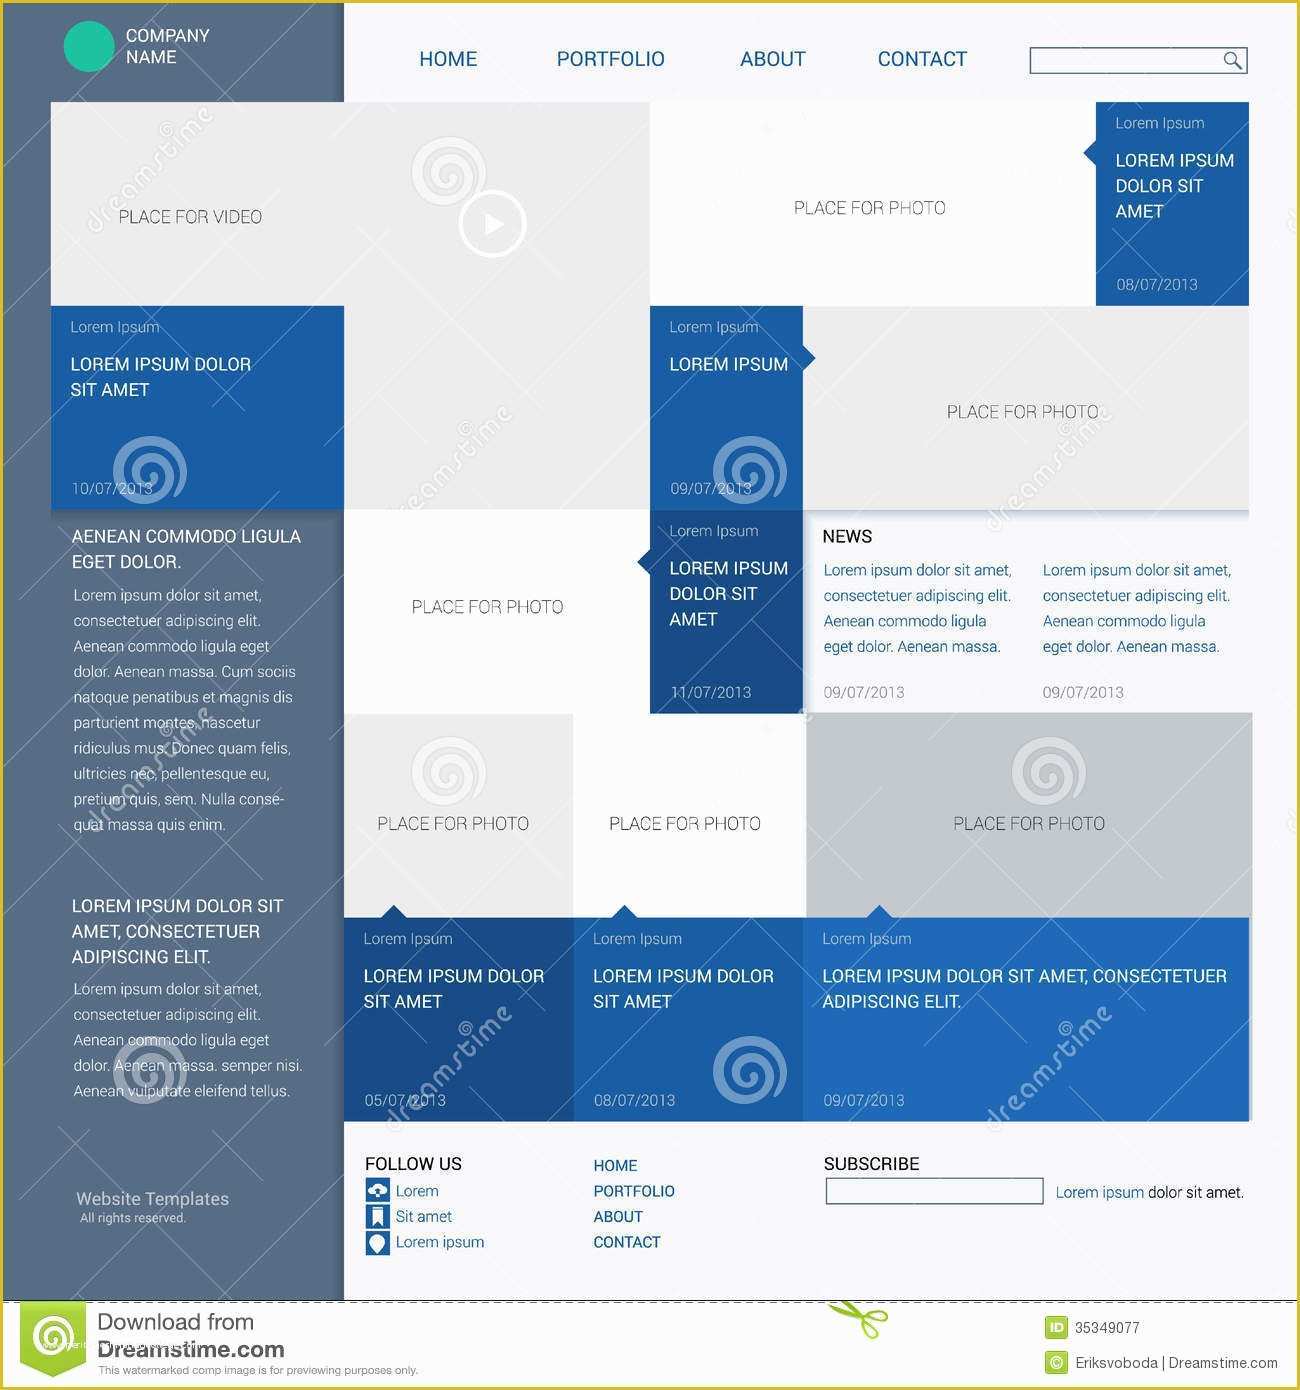 Grid Based Website Templates Free Download Of Template Website Built the 16 Column Grid Royalty Free